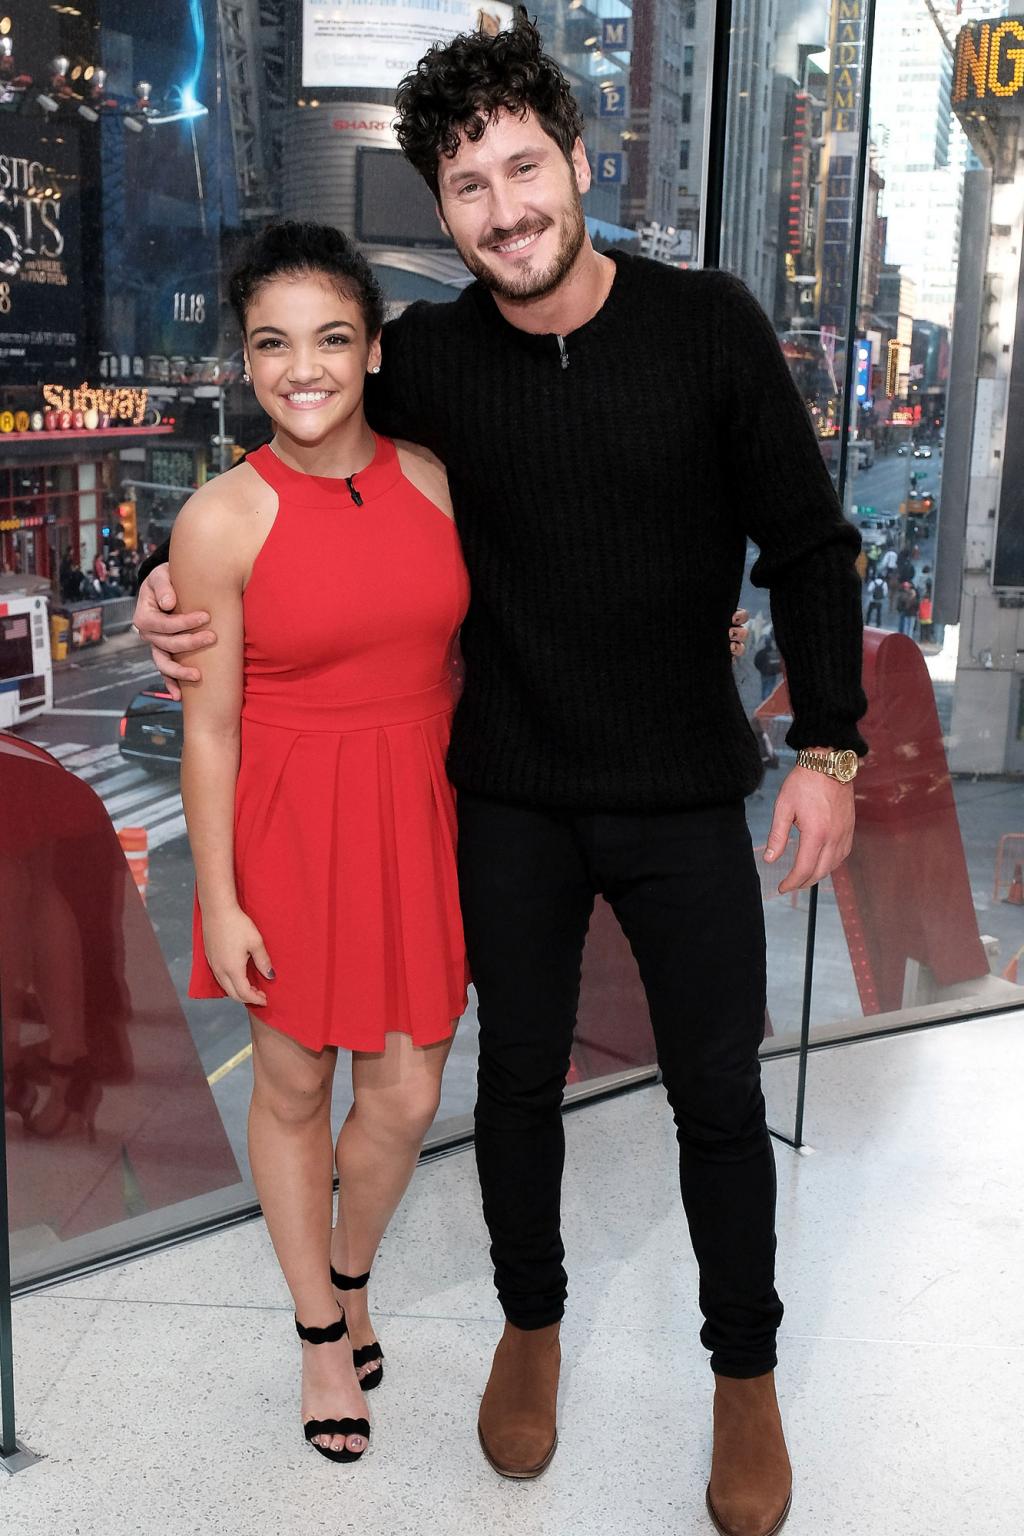 Find Out How Laurie Hernandez Celebrated Her Dancing with the Stars Win (Hint: Itâ€™s Tasty and Cold!)